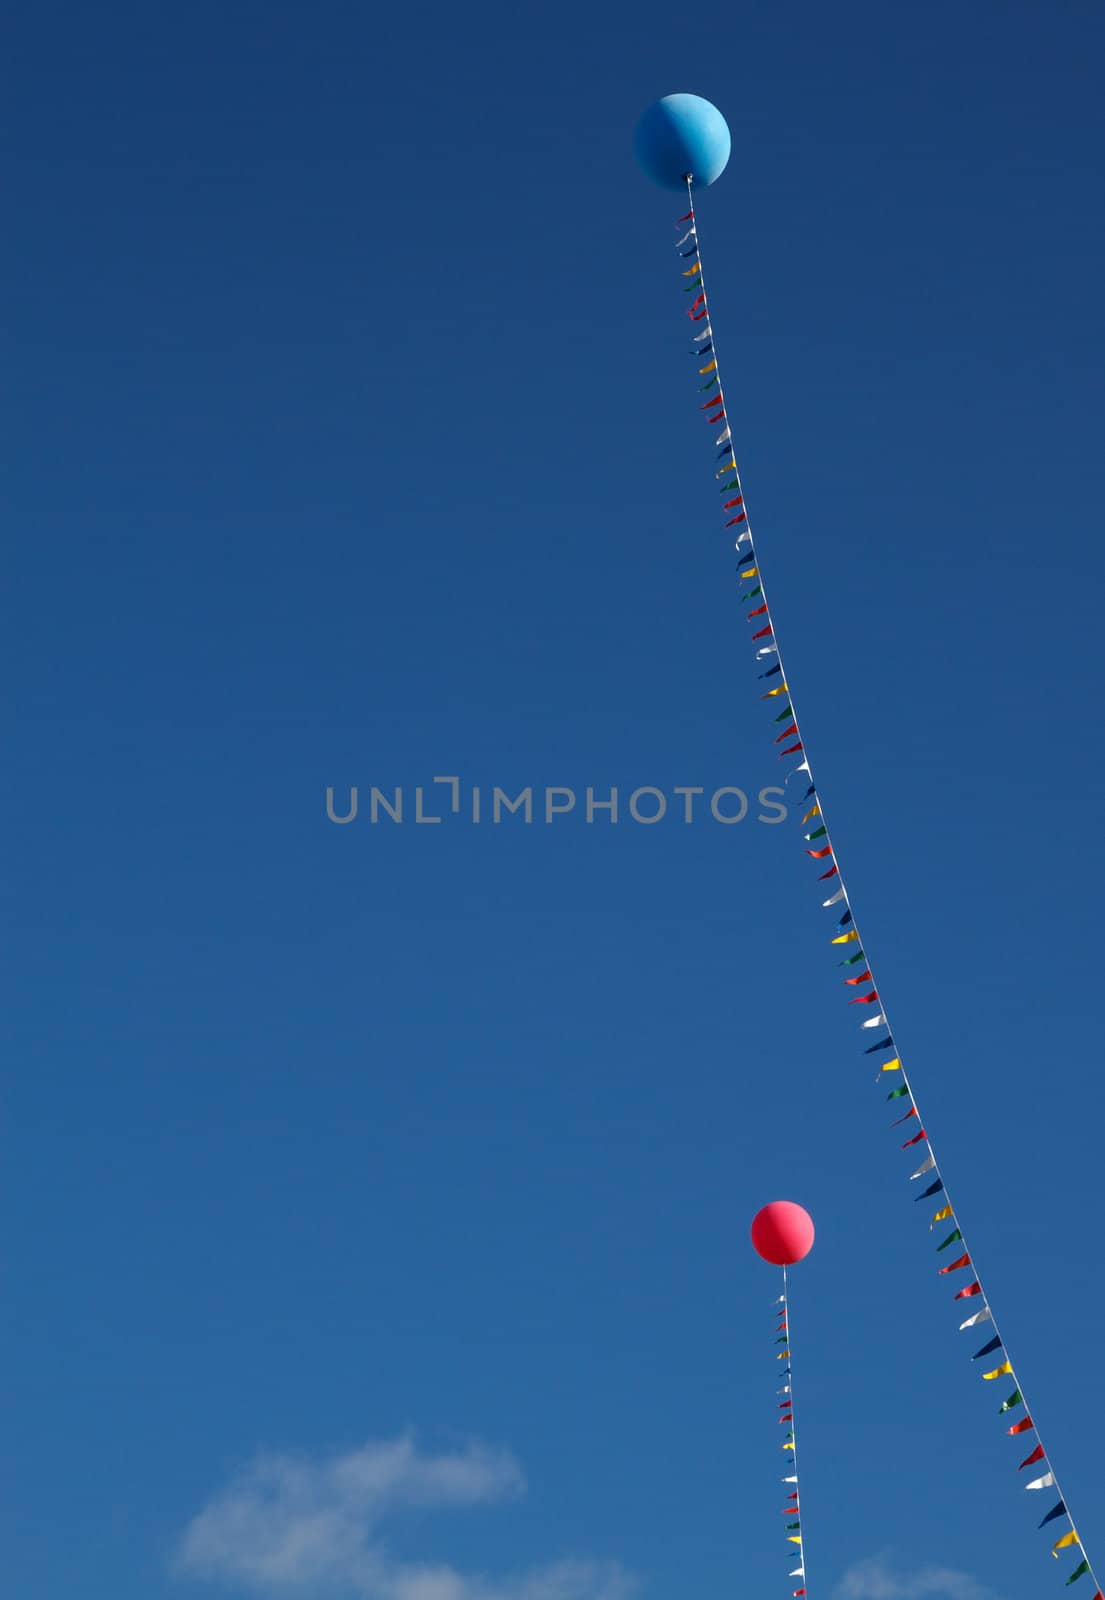 Ballons and flags by bobkeenan